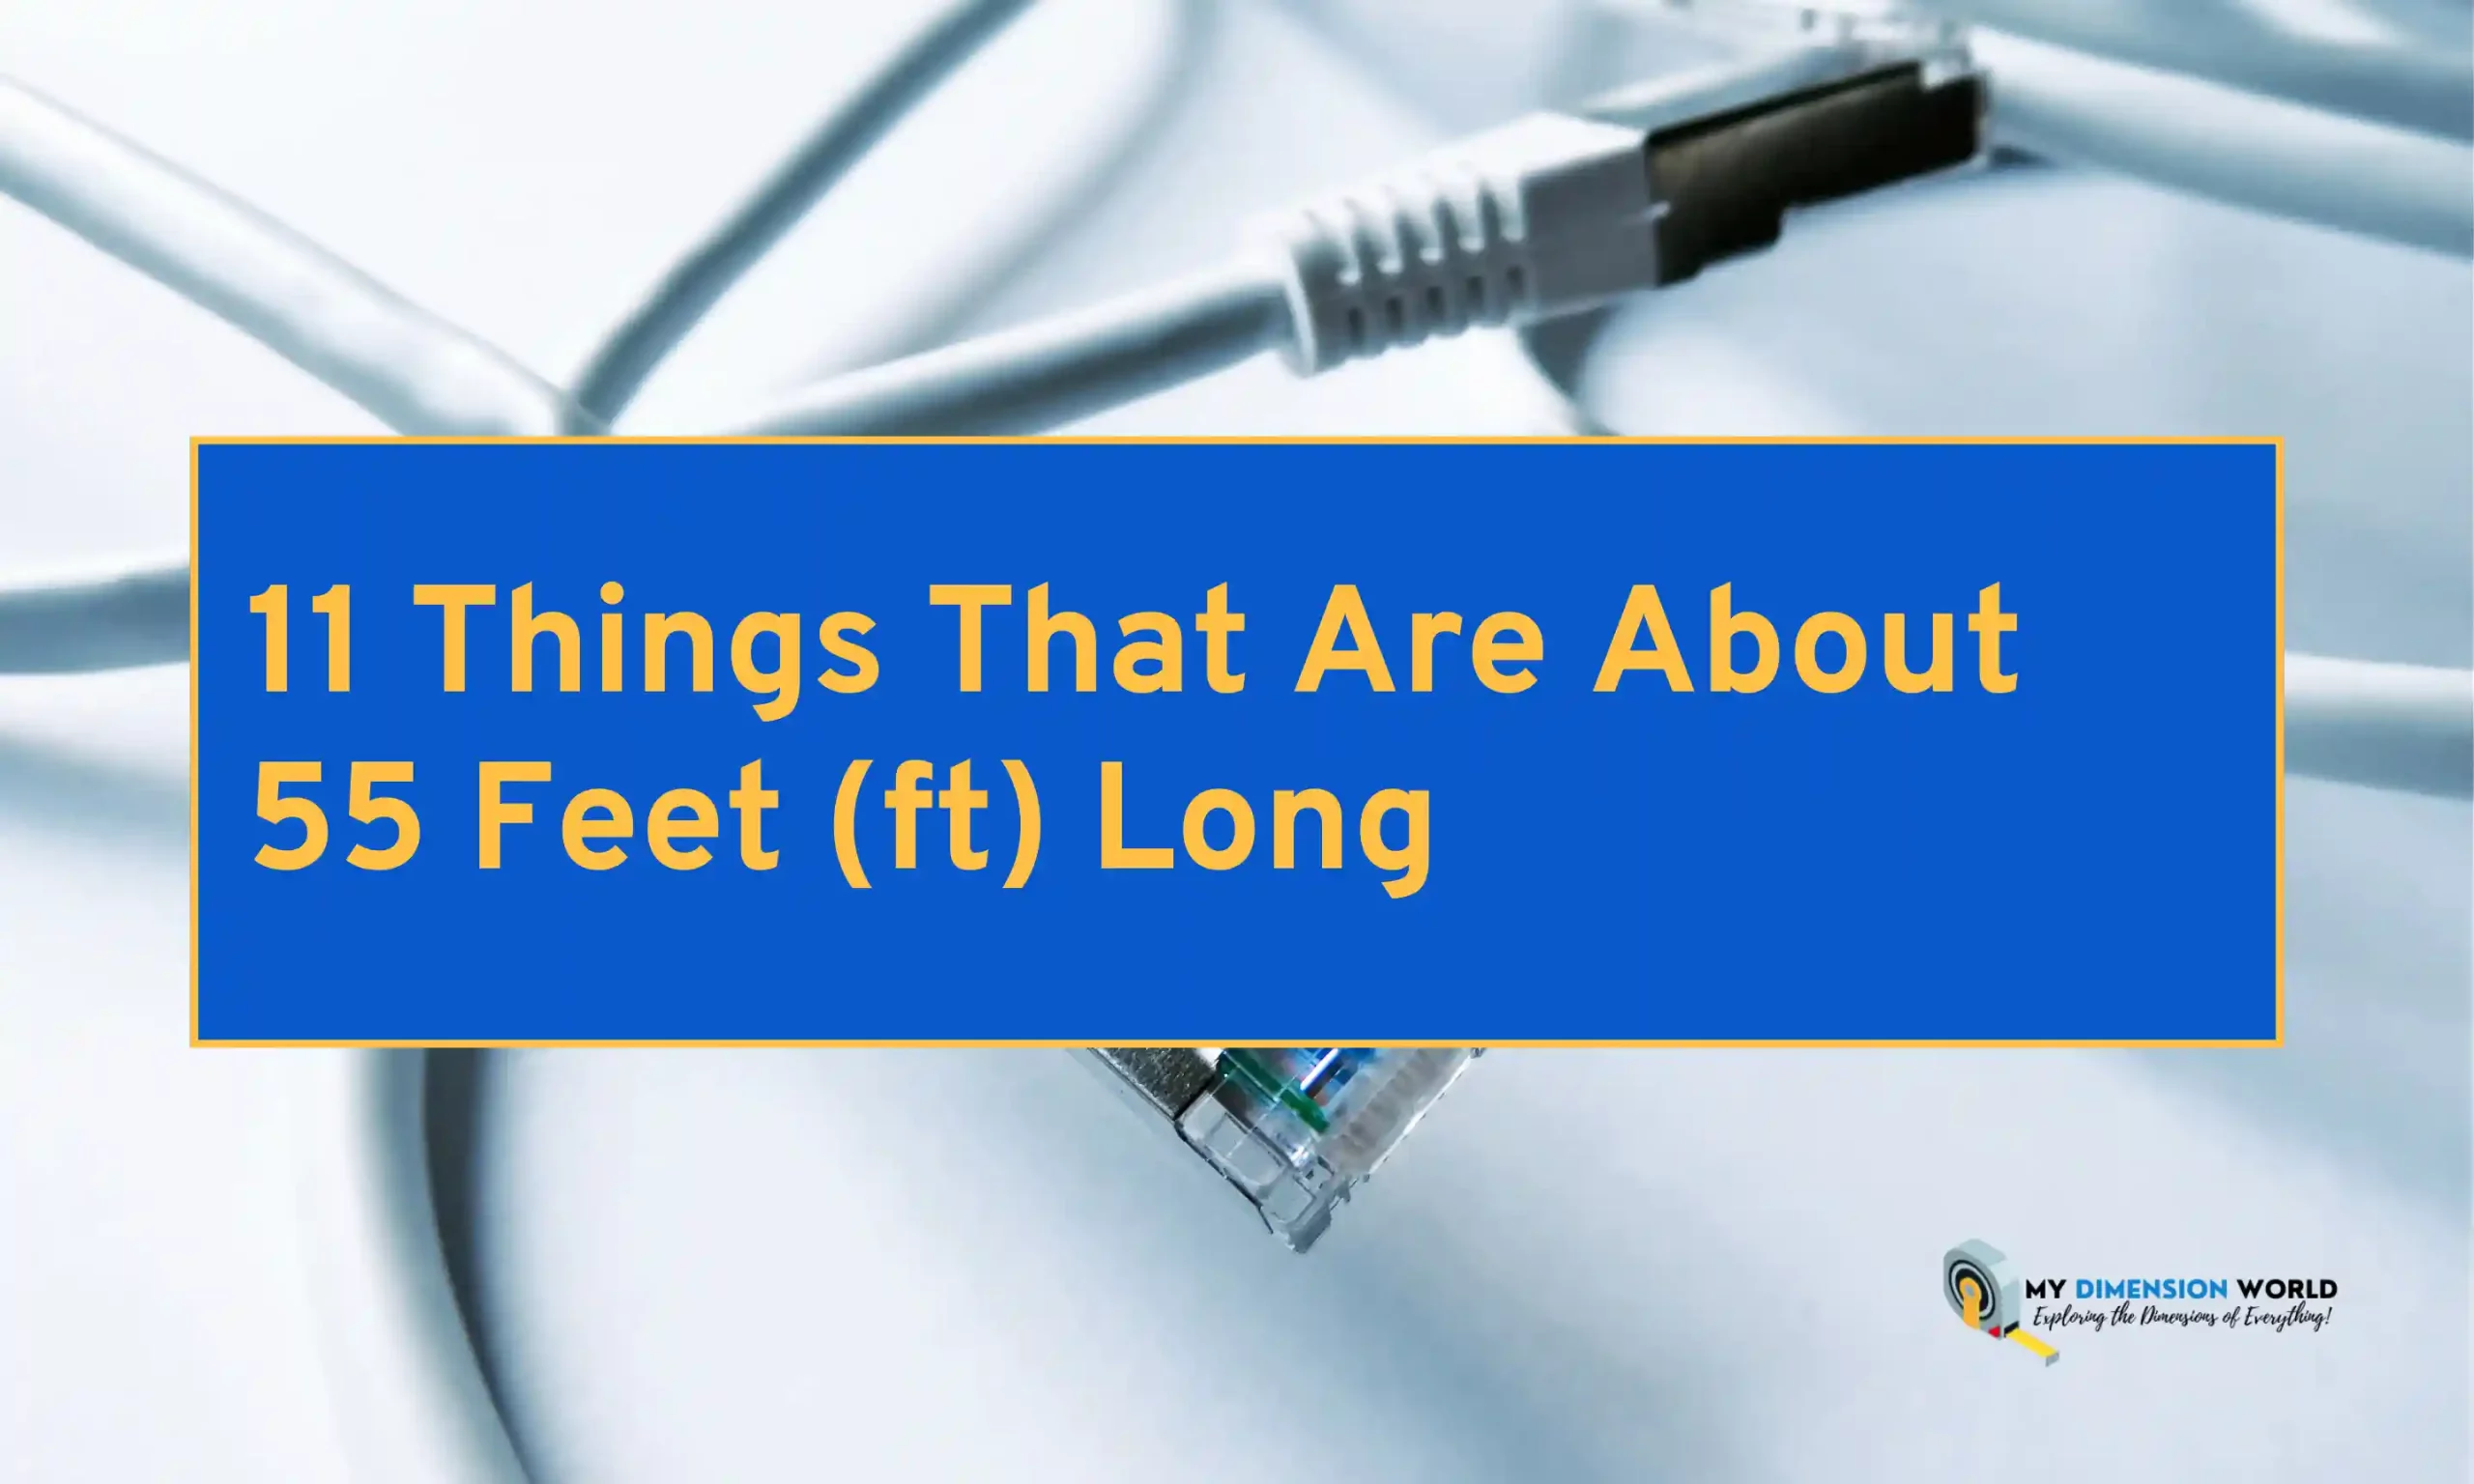 11 Things That Are About 55 Feet (ft) Long